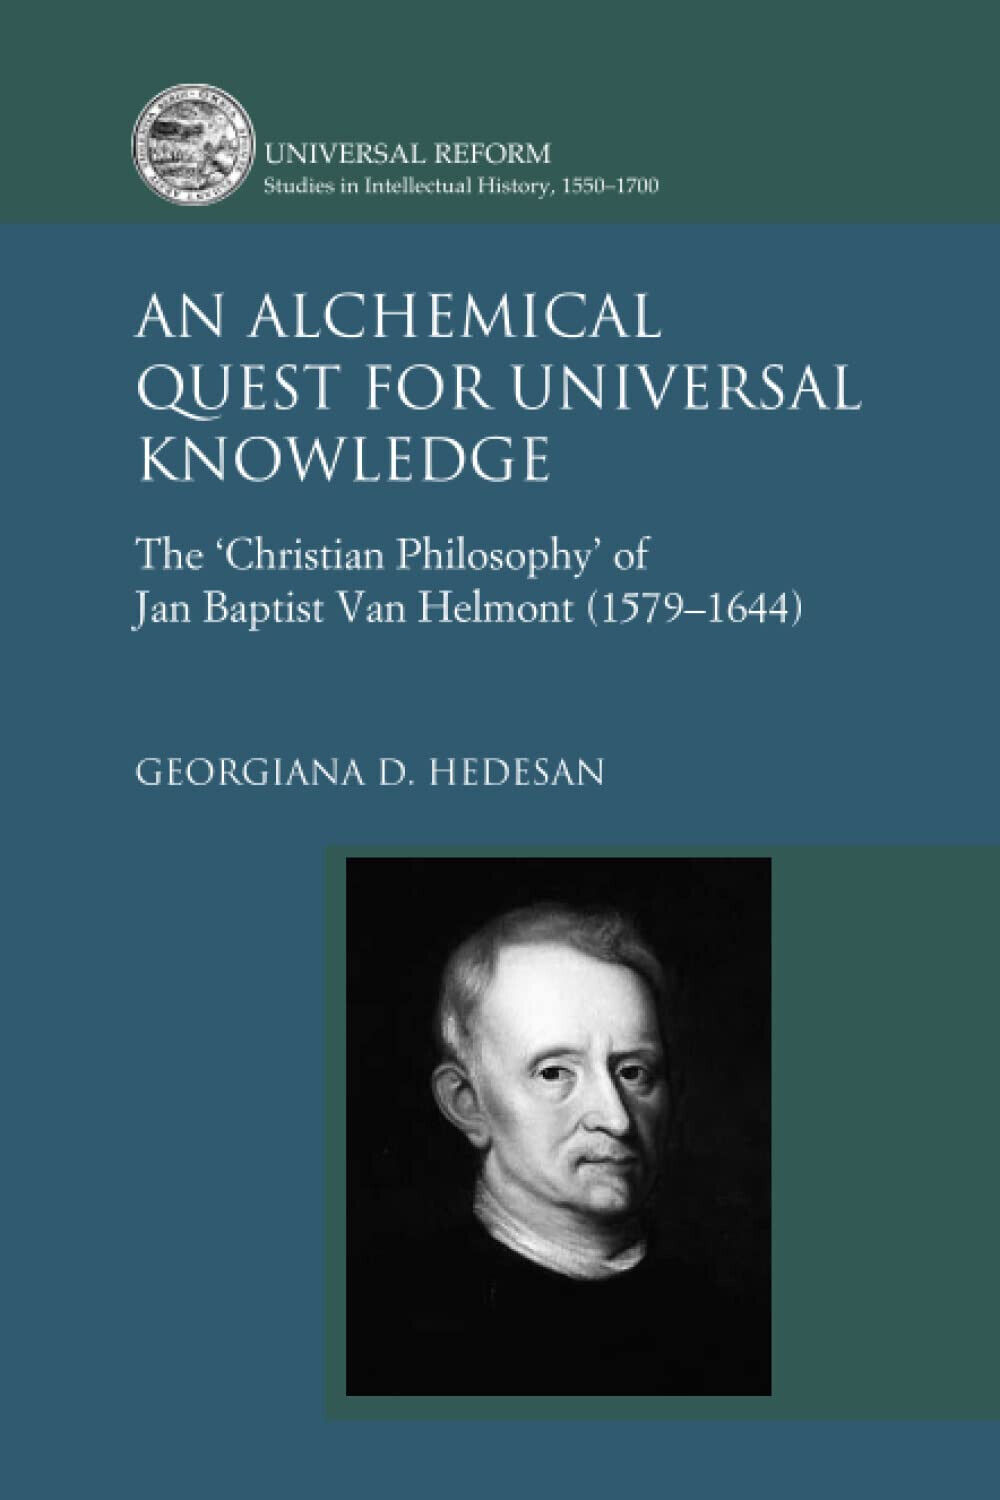 An Alchemical Quest For Universal Knowledge - Georgiana D. Hedesan - 2022